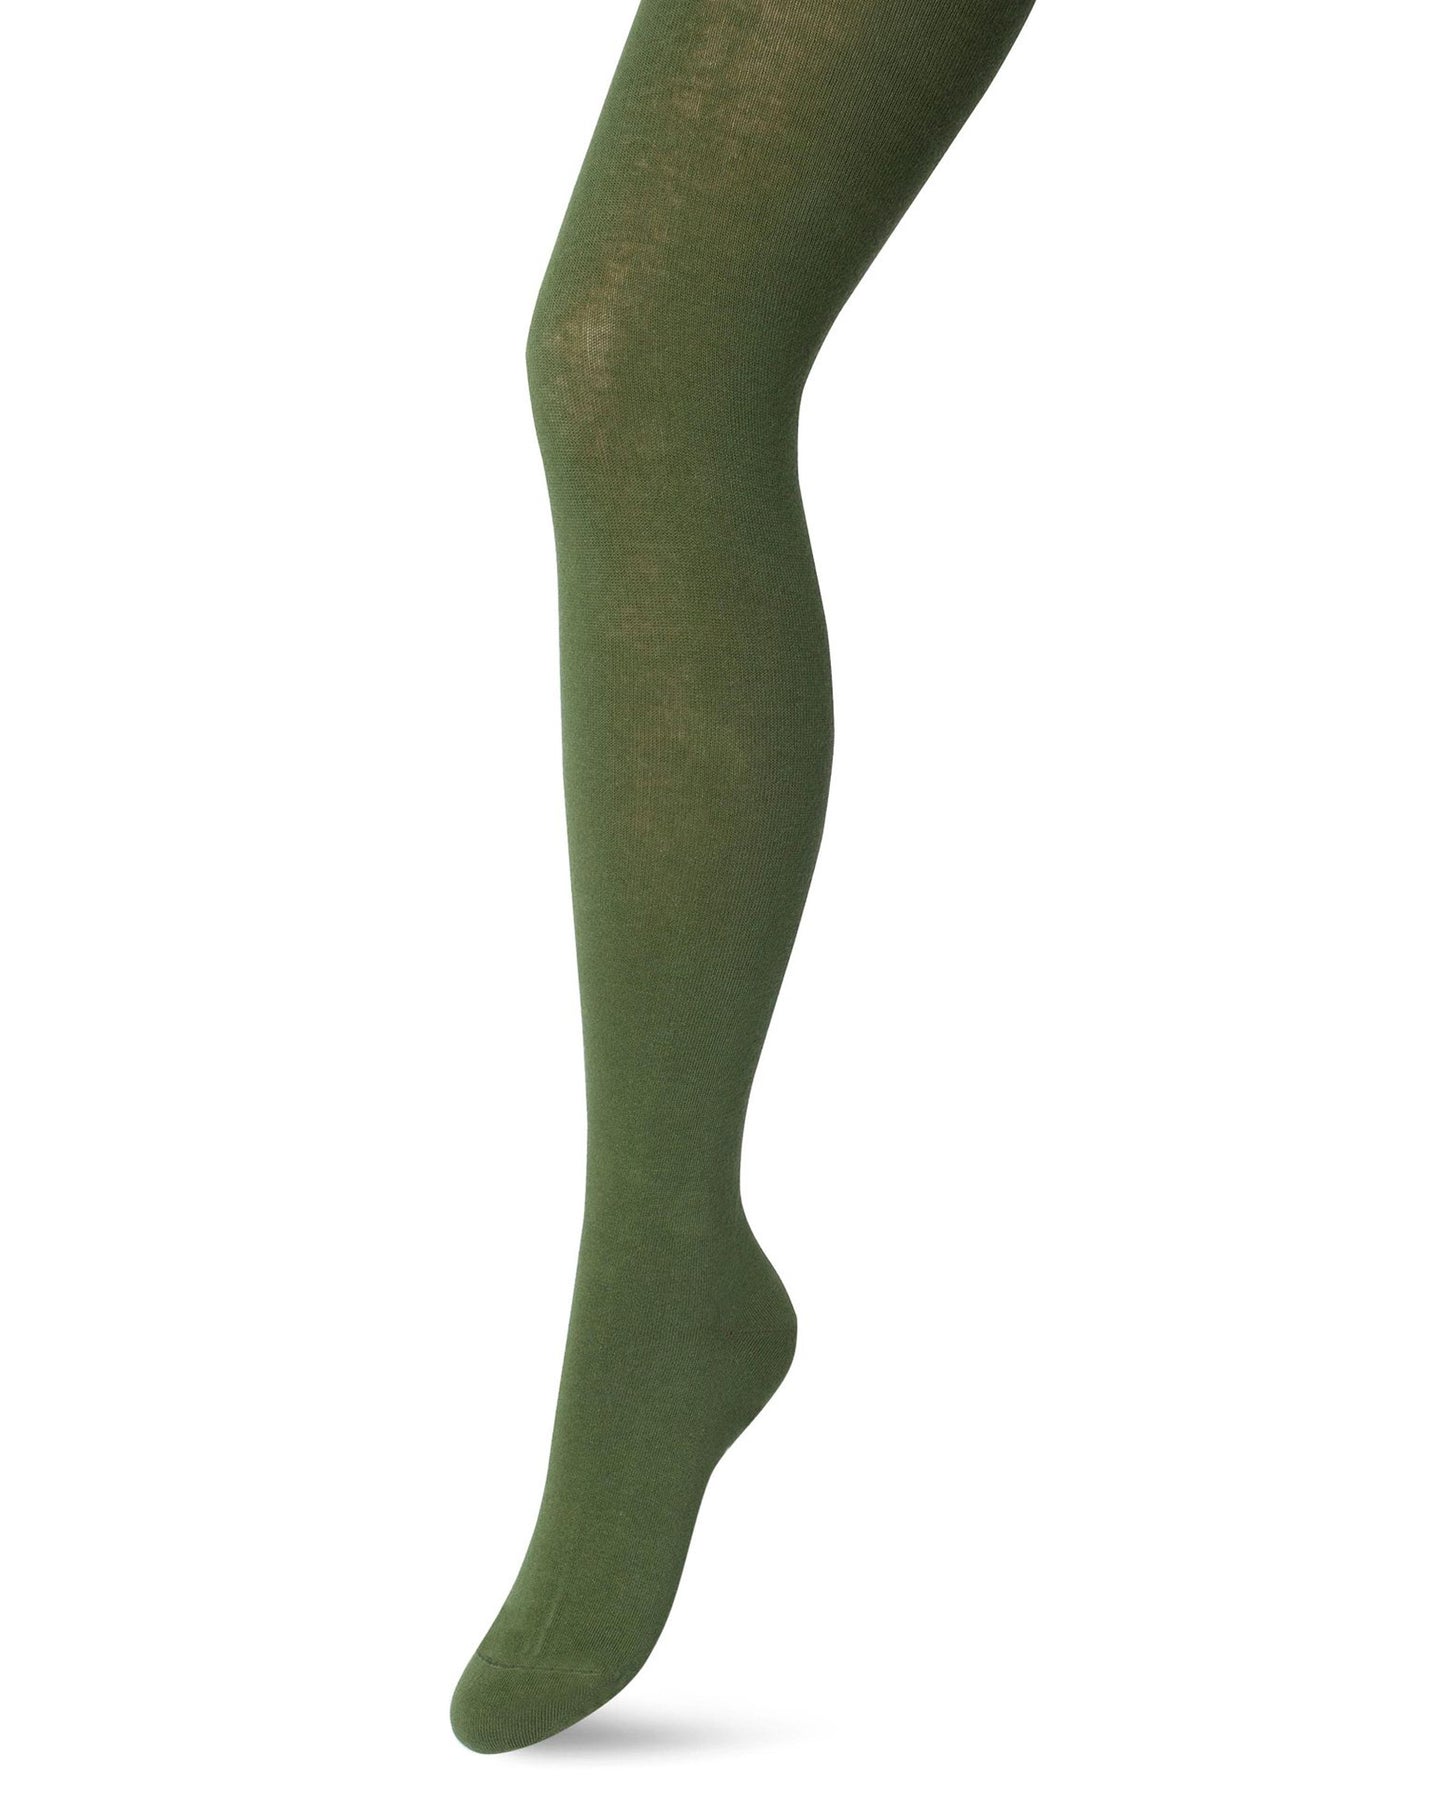 Bonnie Doon Bio Cotton Tights - Olive green warm and soft knitted organic cotton Winter thermal tights.